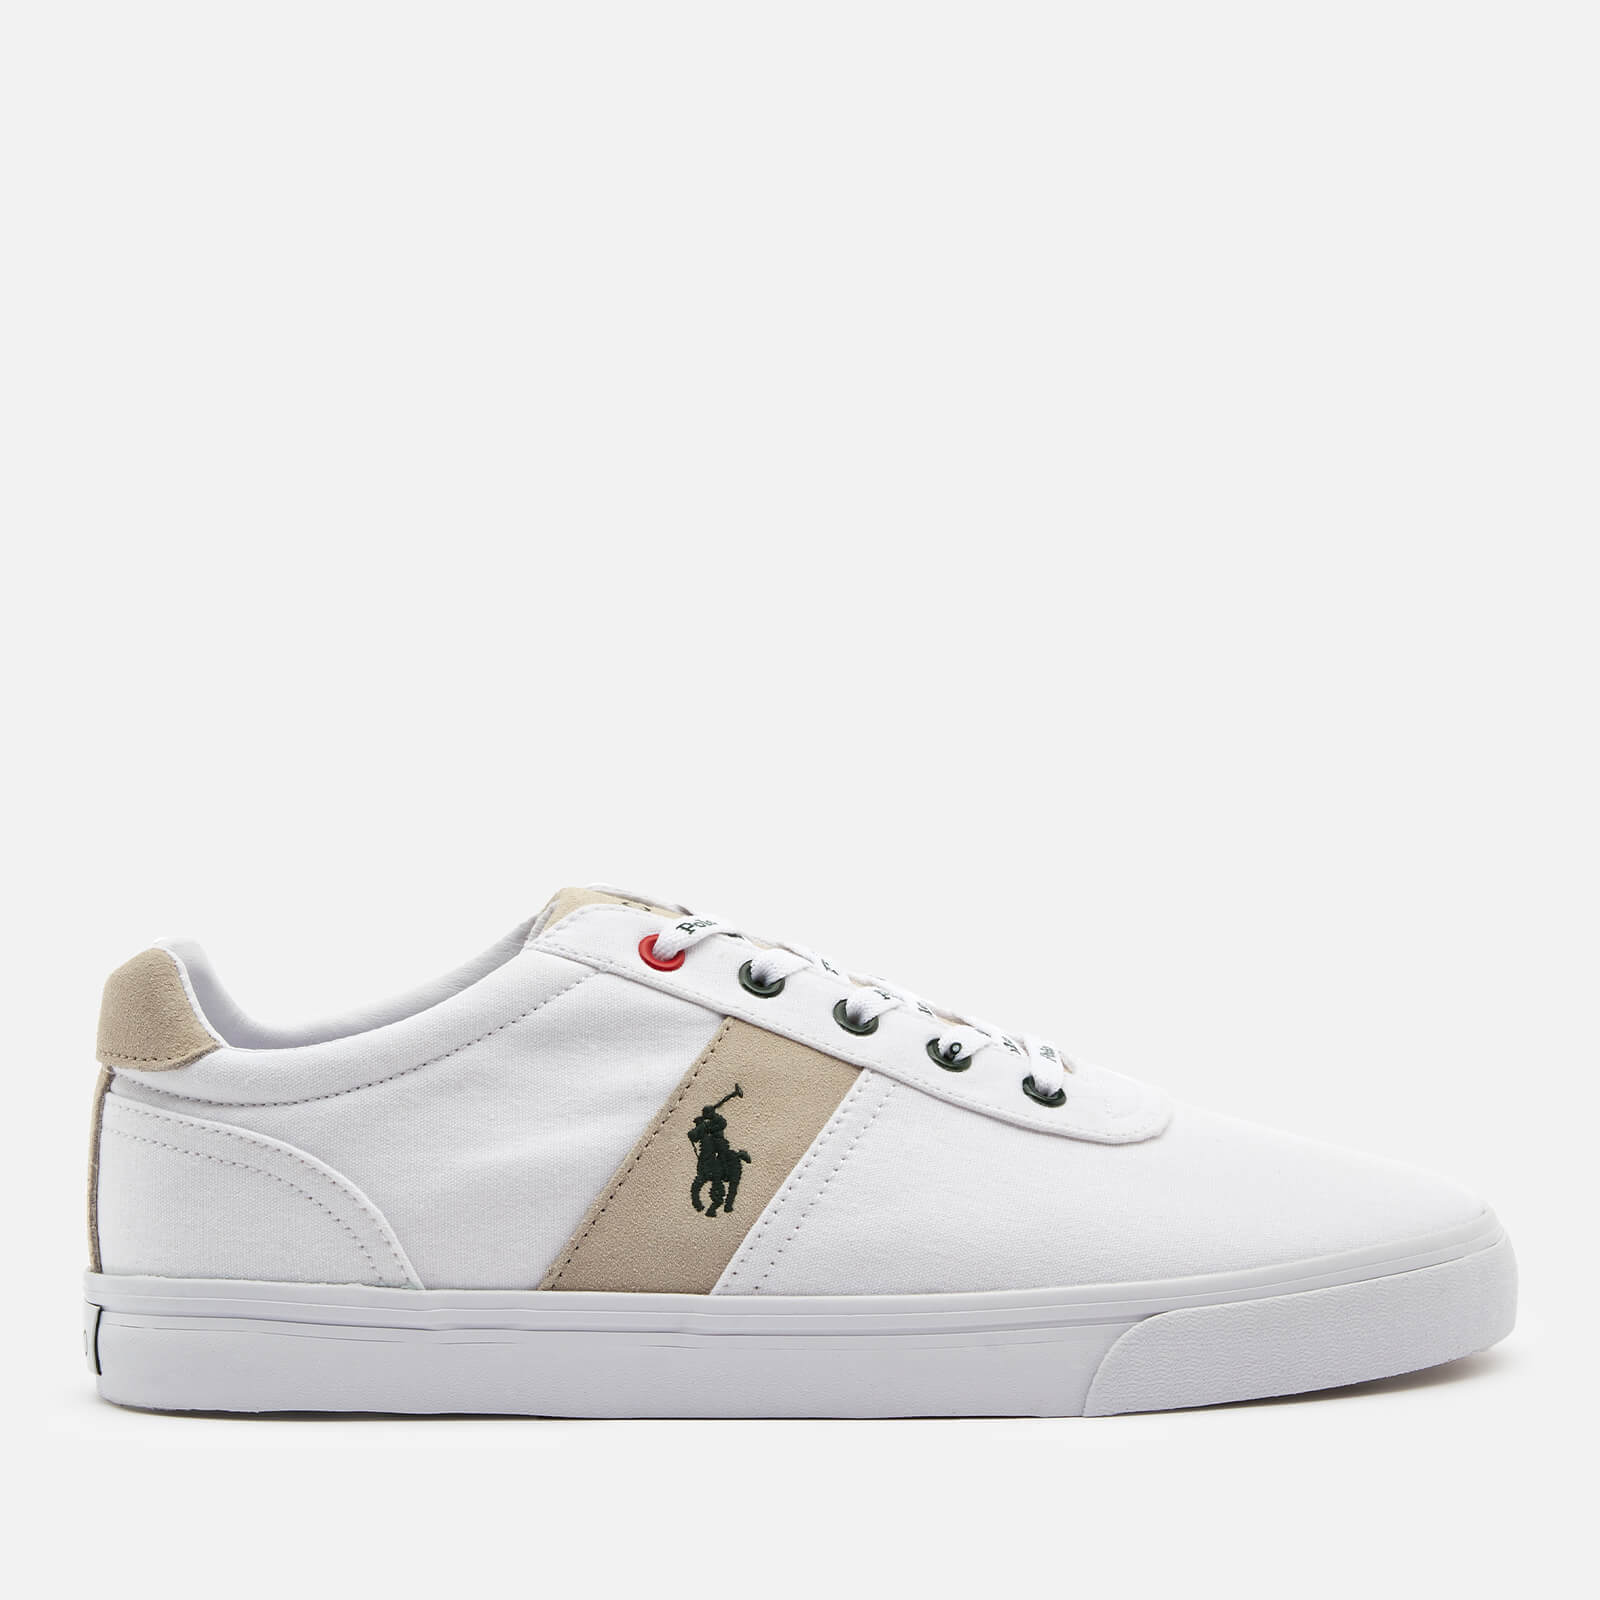 Polo Ralph Lauren Men's Hanford Sustainable Low Top Trainers - White/College Green - UK 7